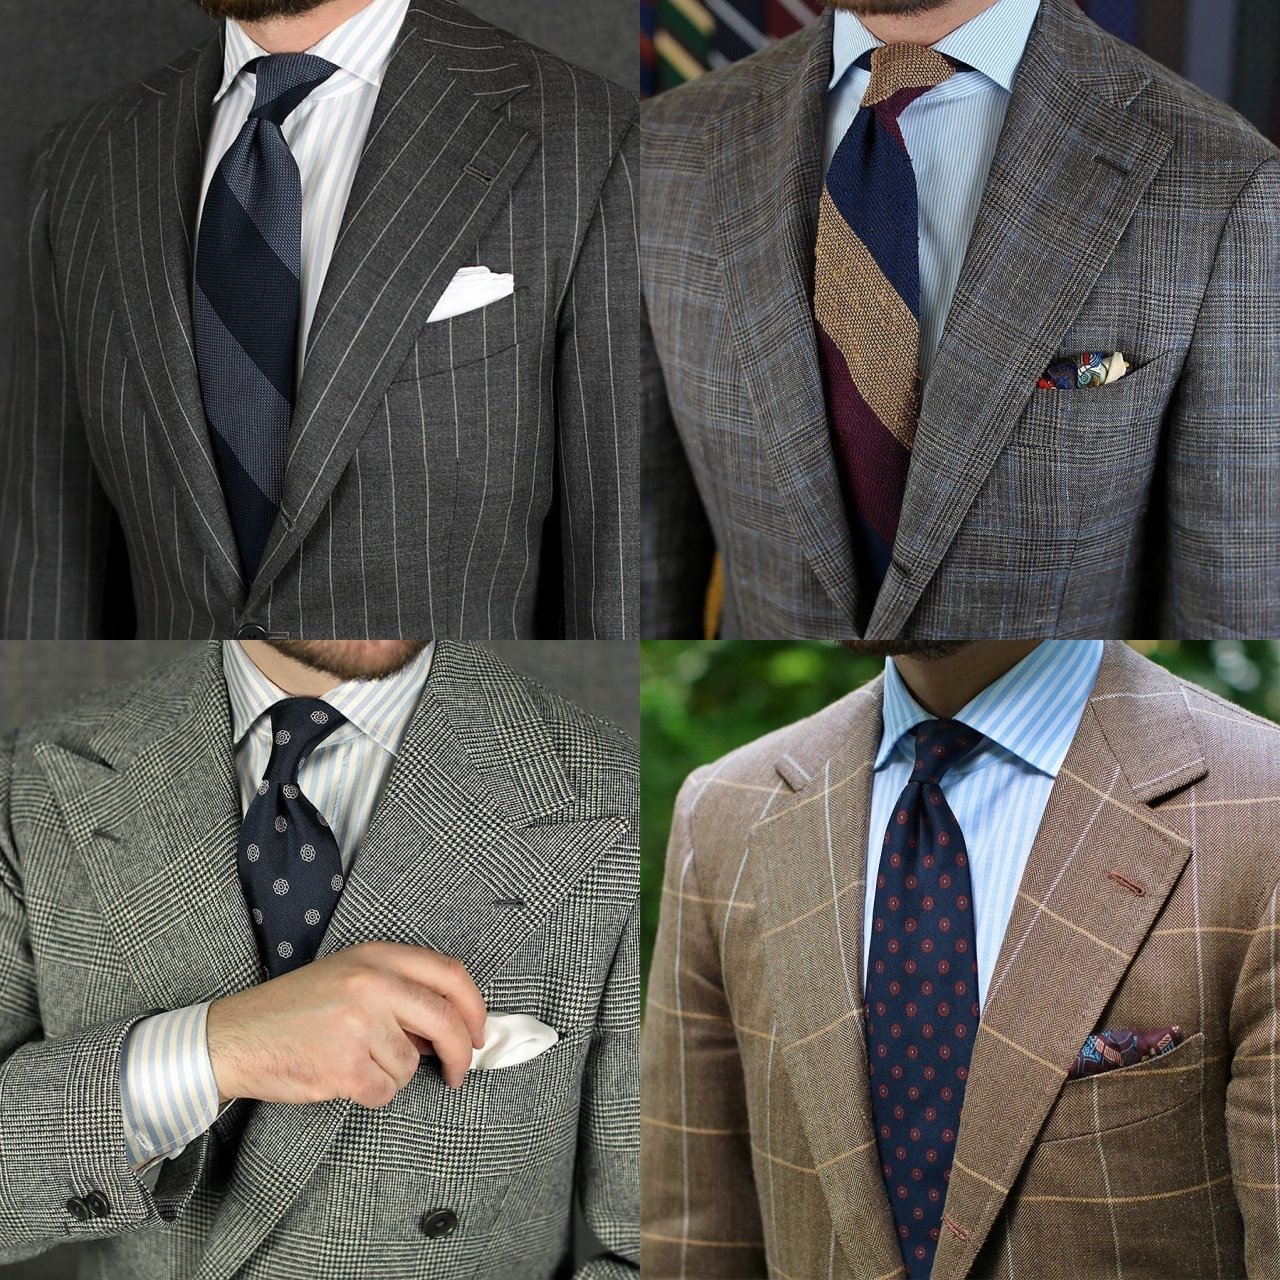 How to match a tie to shirt and suit - three patterns